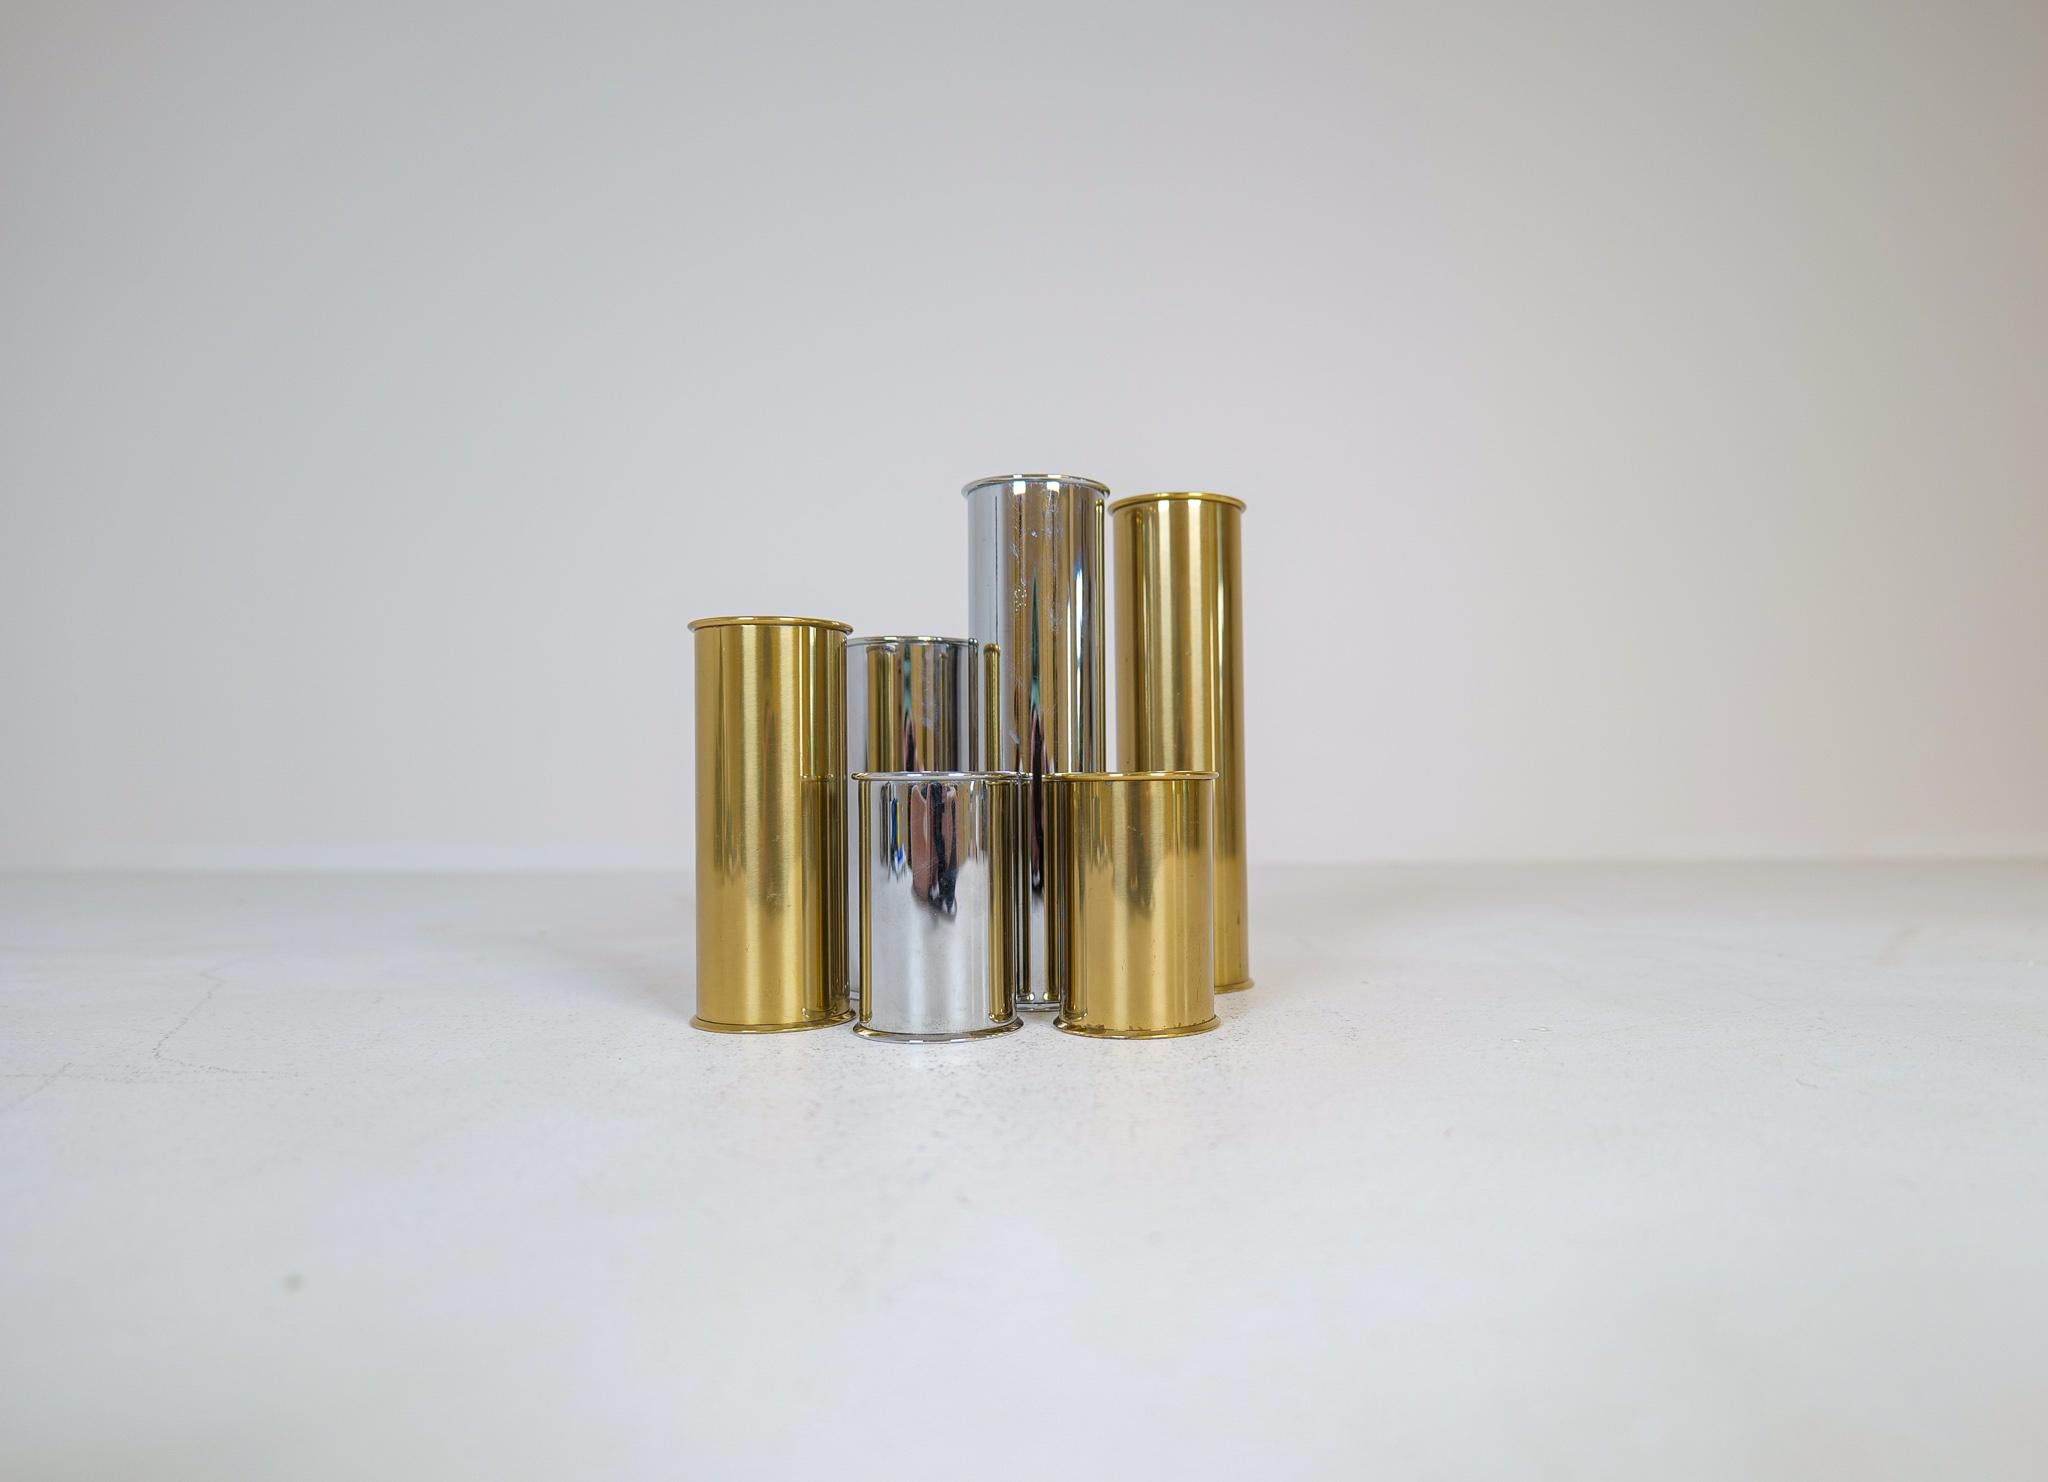 Set of 6 candle holders in brass and worked steel. These icon candleholders was designed by Staffan Englesson in Sweden, 1970s. 
The cylinder-shaped form gives a really nice look and works perfectly with brass and steal to these holders,

Good